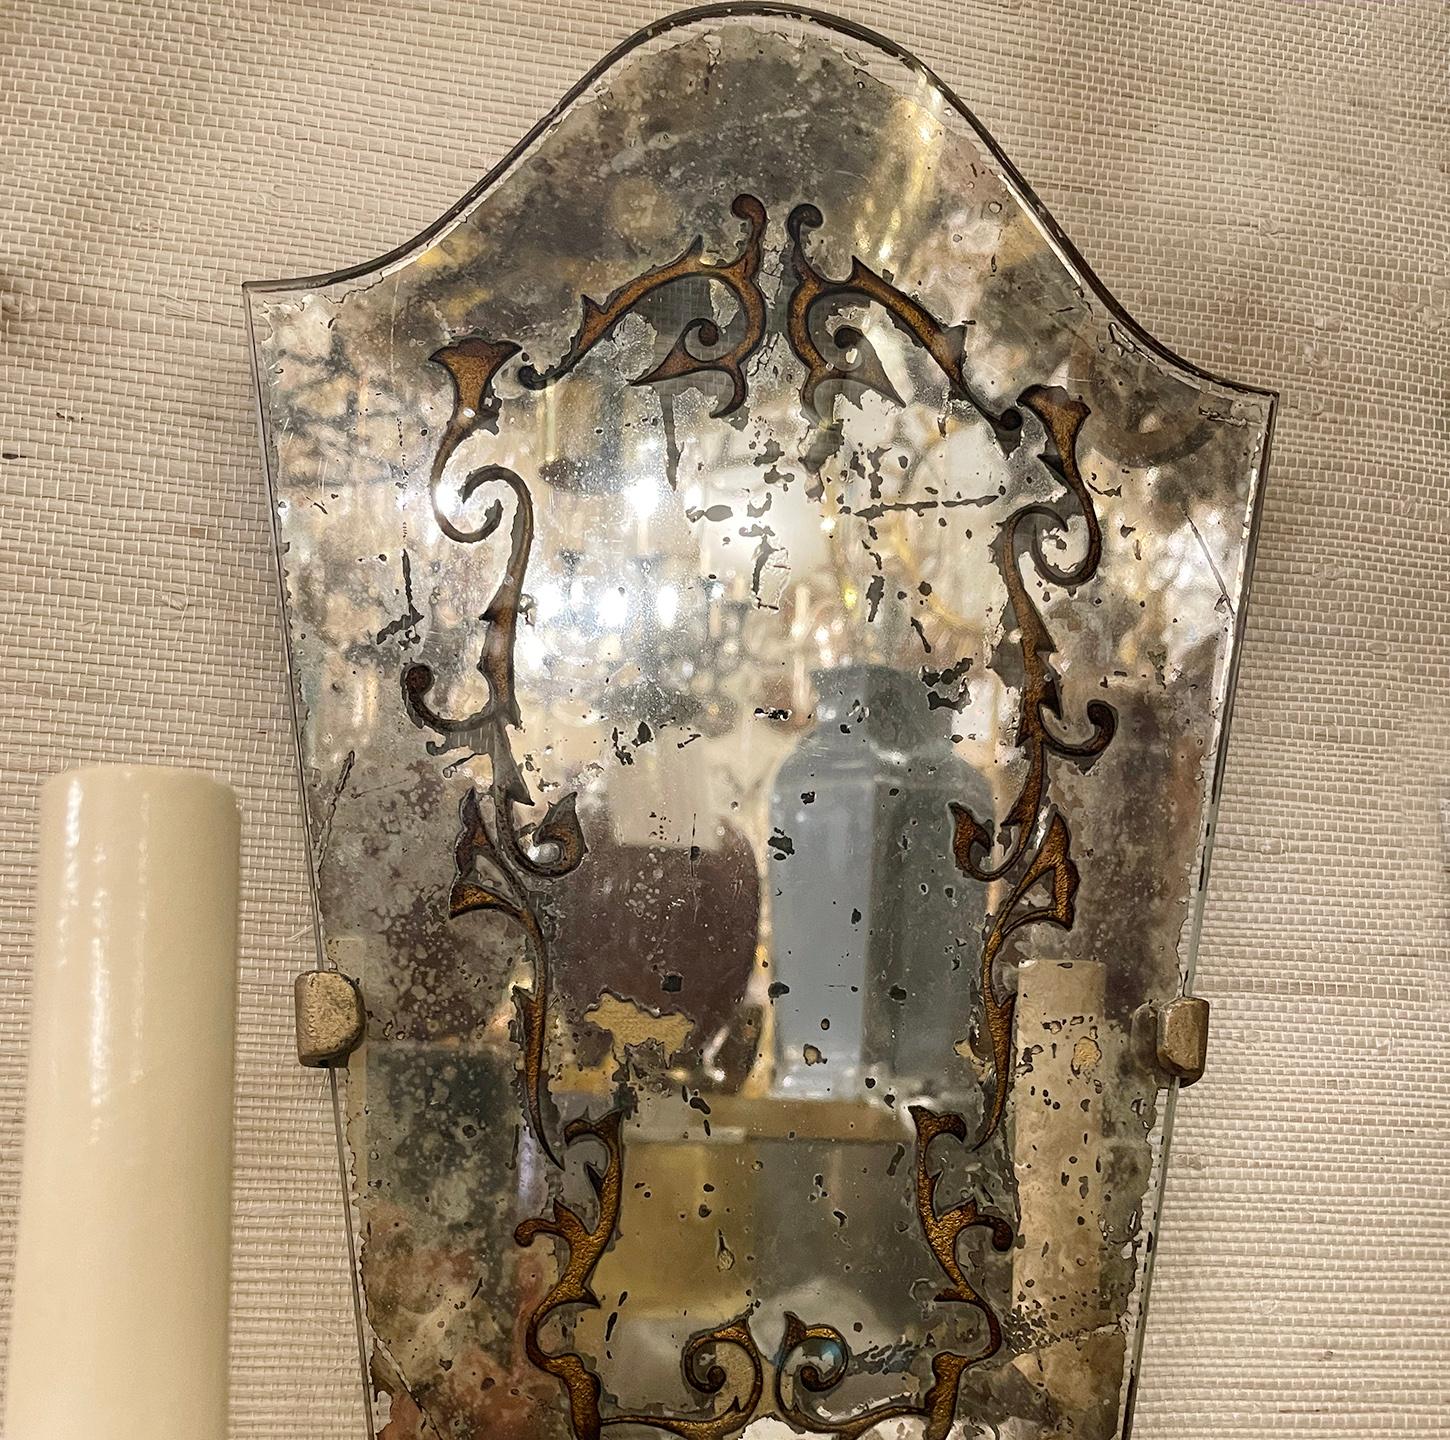 Set of three mirrored sconces with gilt details etched on mirror. Sold individually.

Measurements:
Height: 15